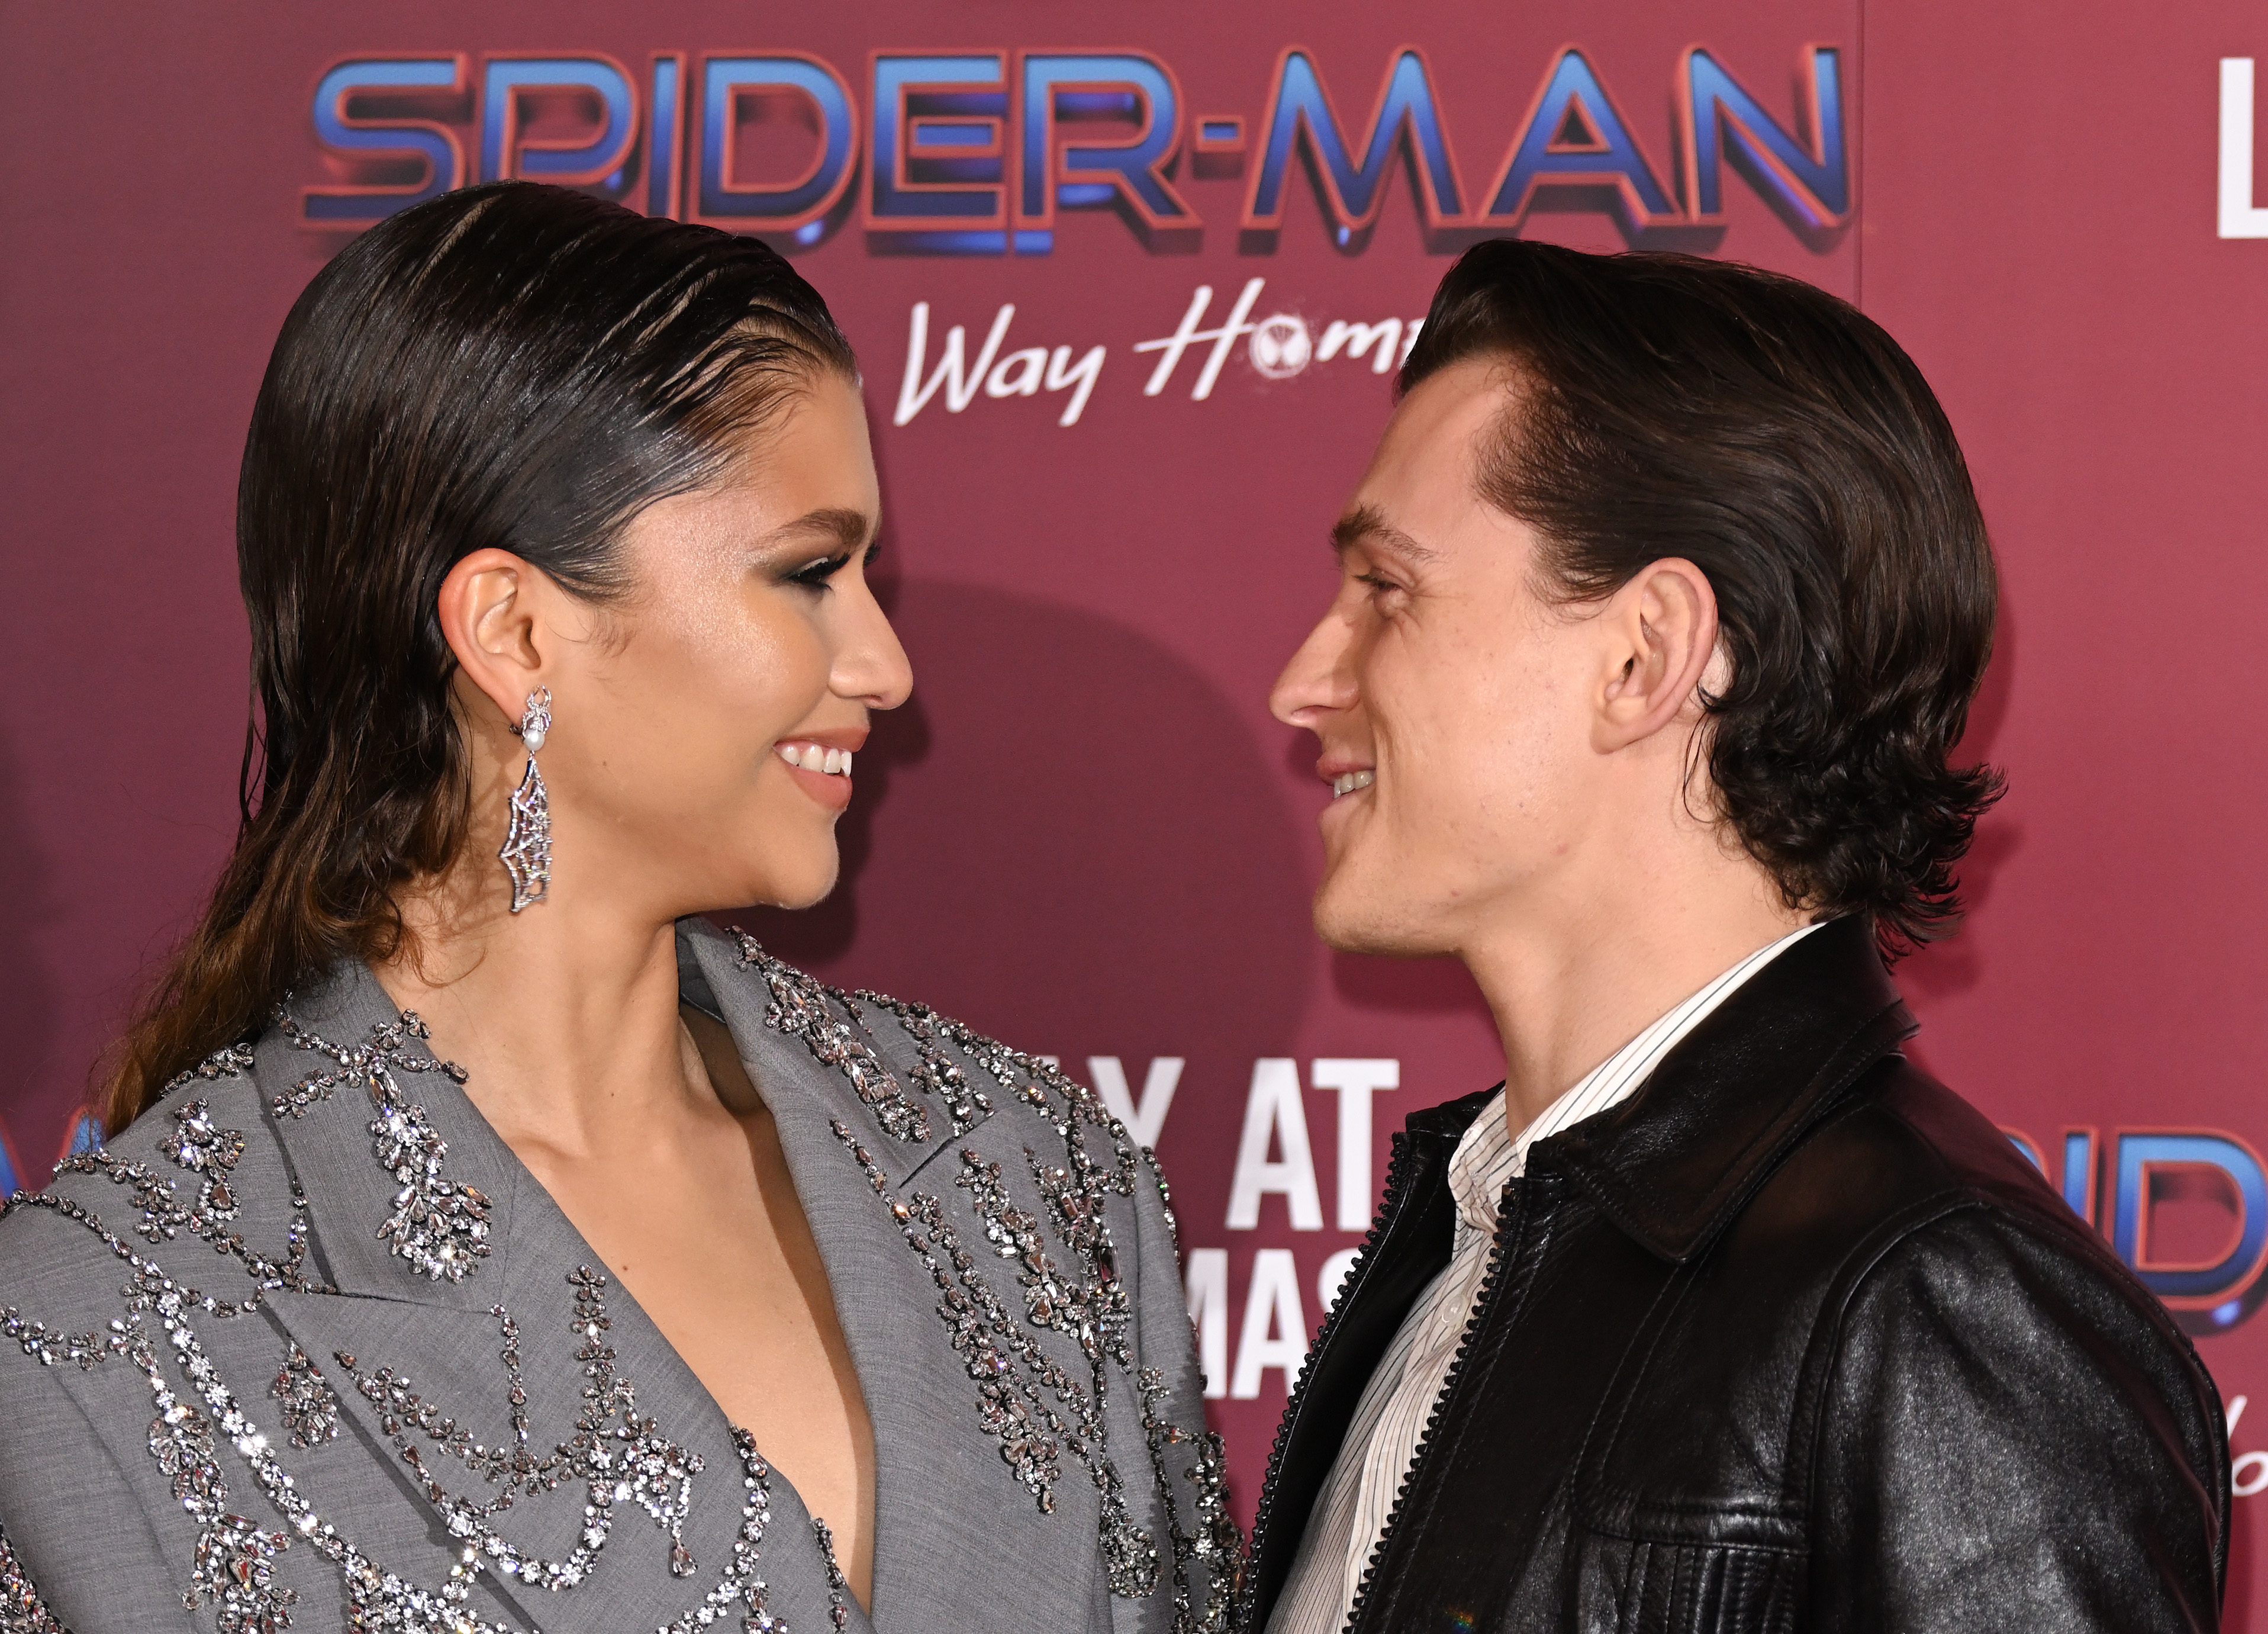 Marvel's 'Spider-Man: No Way Home' stars Zendaya and Tom Holland smile at one another as they pose for pictures. Zendaya wears a gray suit with diamond patterns on it and dangly spider web earrings. Holland wears a black leather jacket over a white striped button-up shirt.